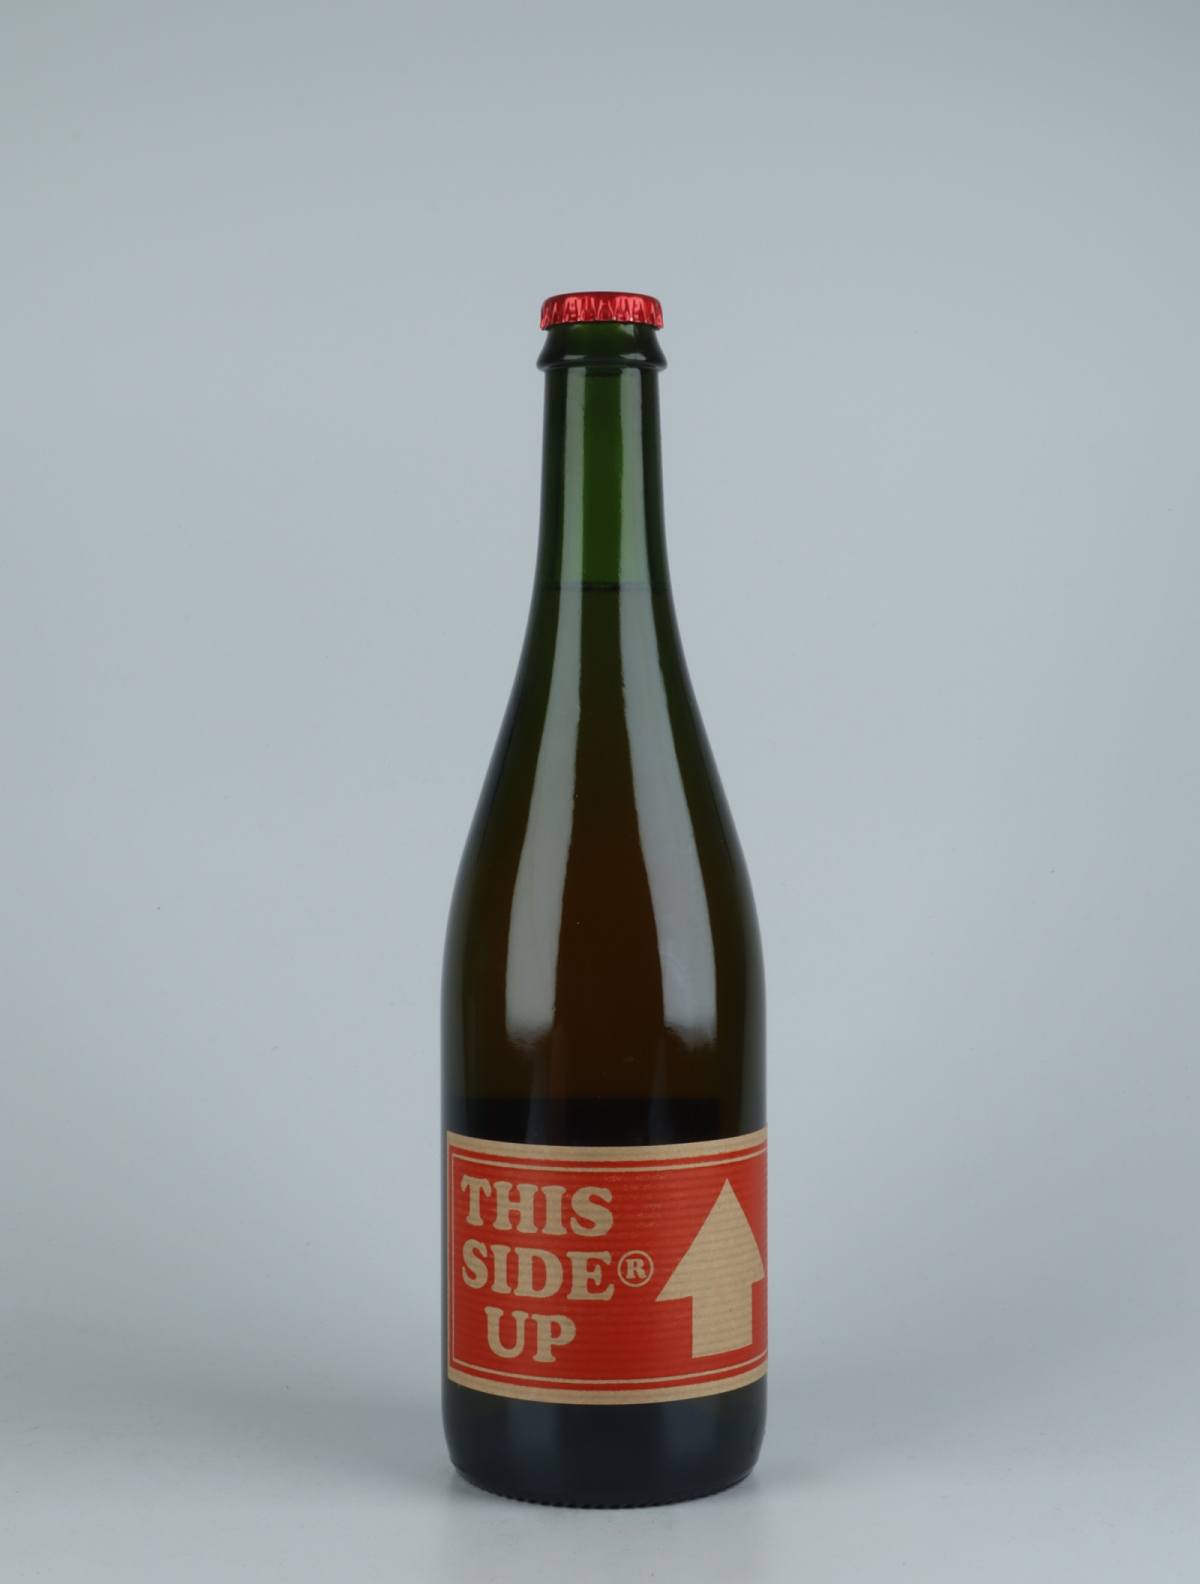 A bottle 2019 This Sider Up Cider from Cyril Zangs, Normandy in France